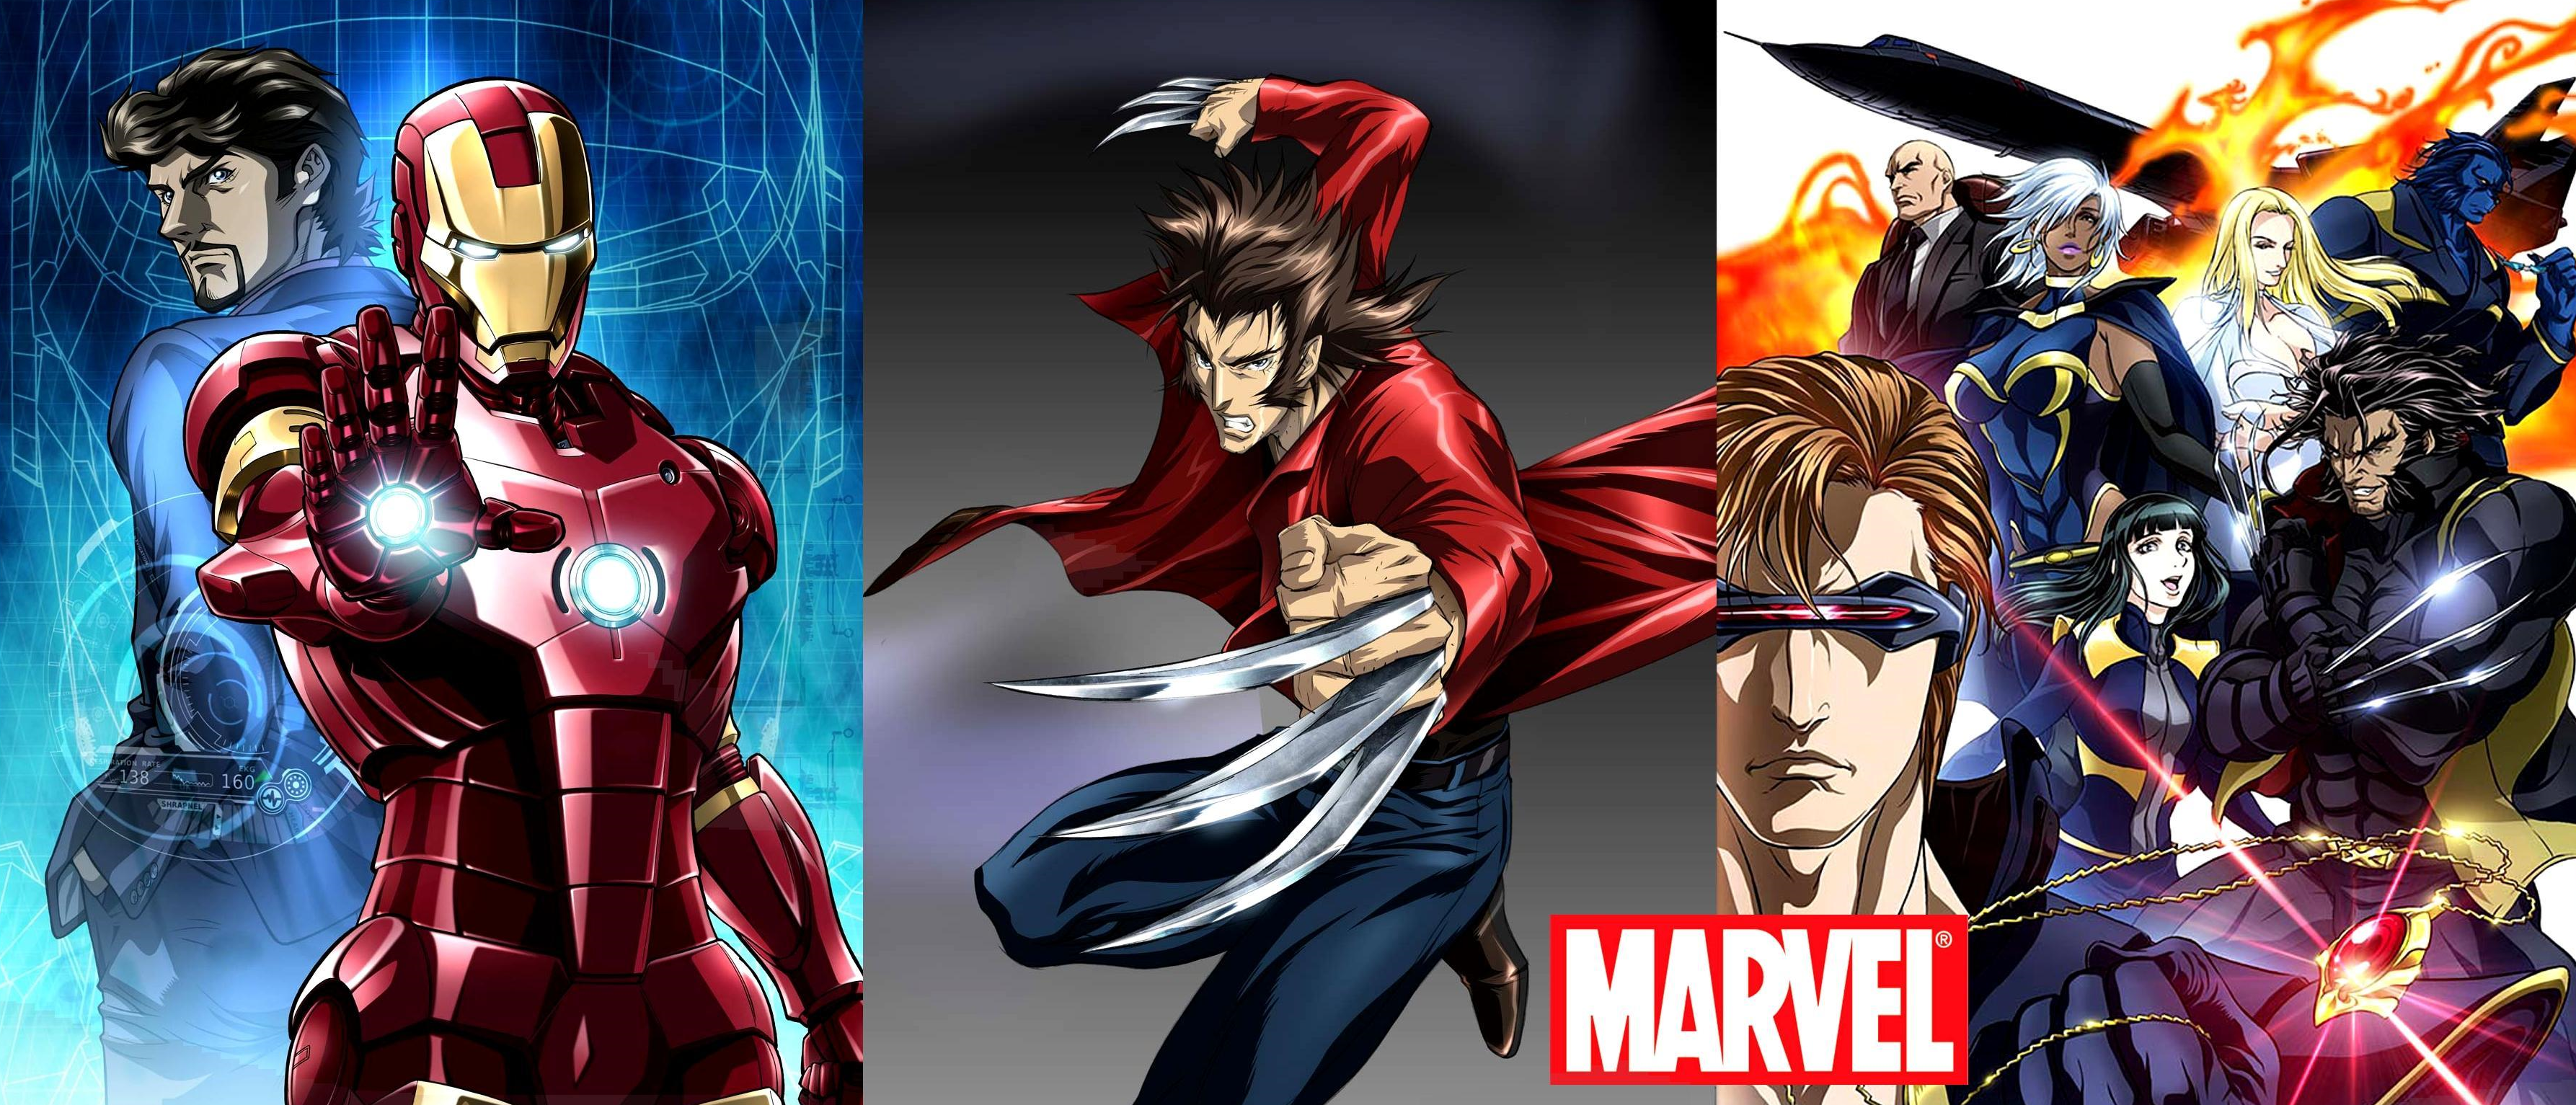 10 Marvel superheroes who would be a perfect match for an anime series